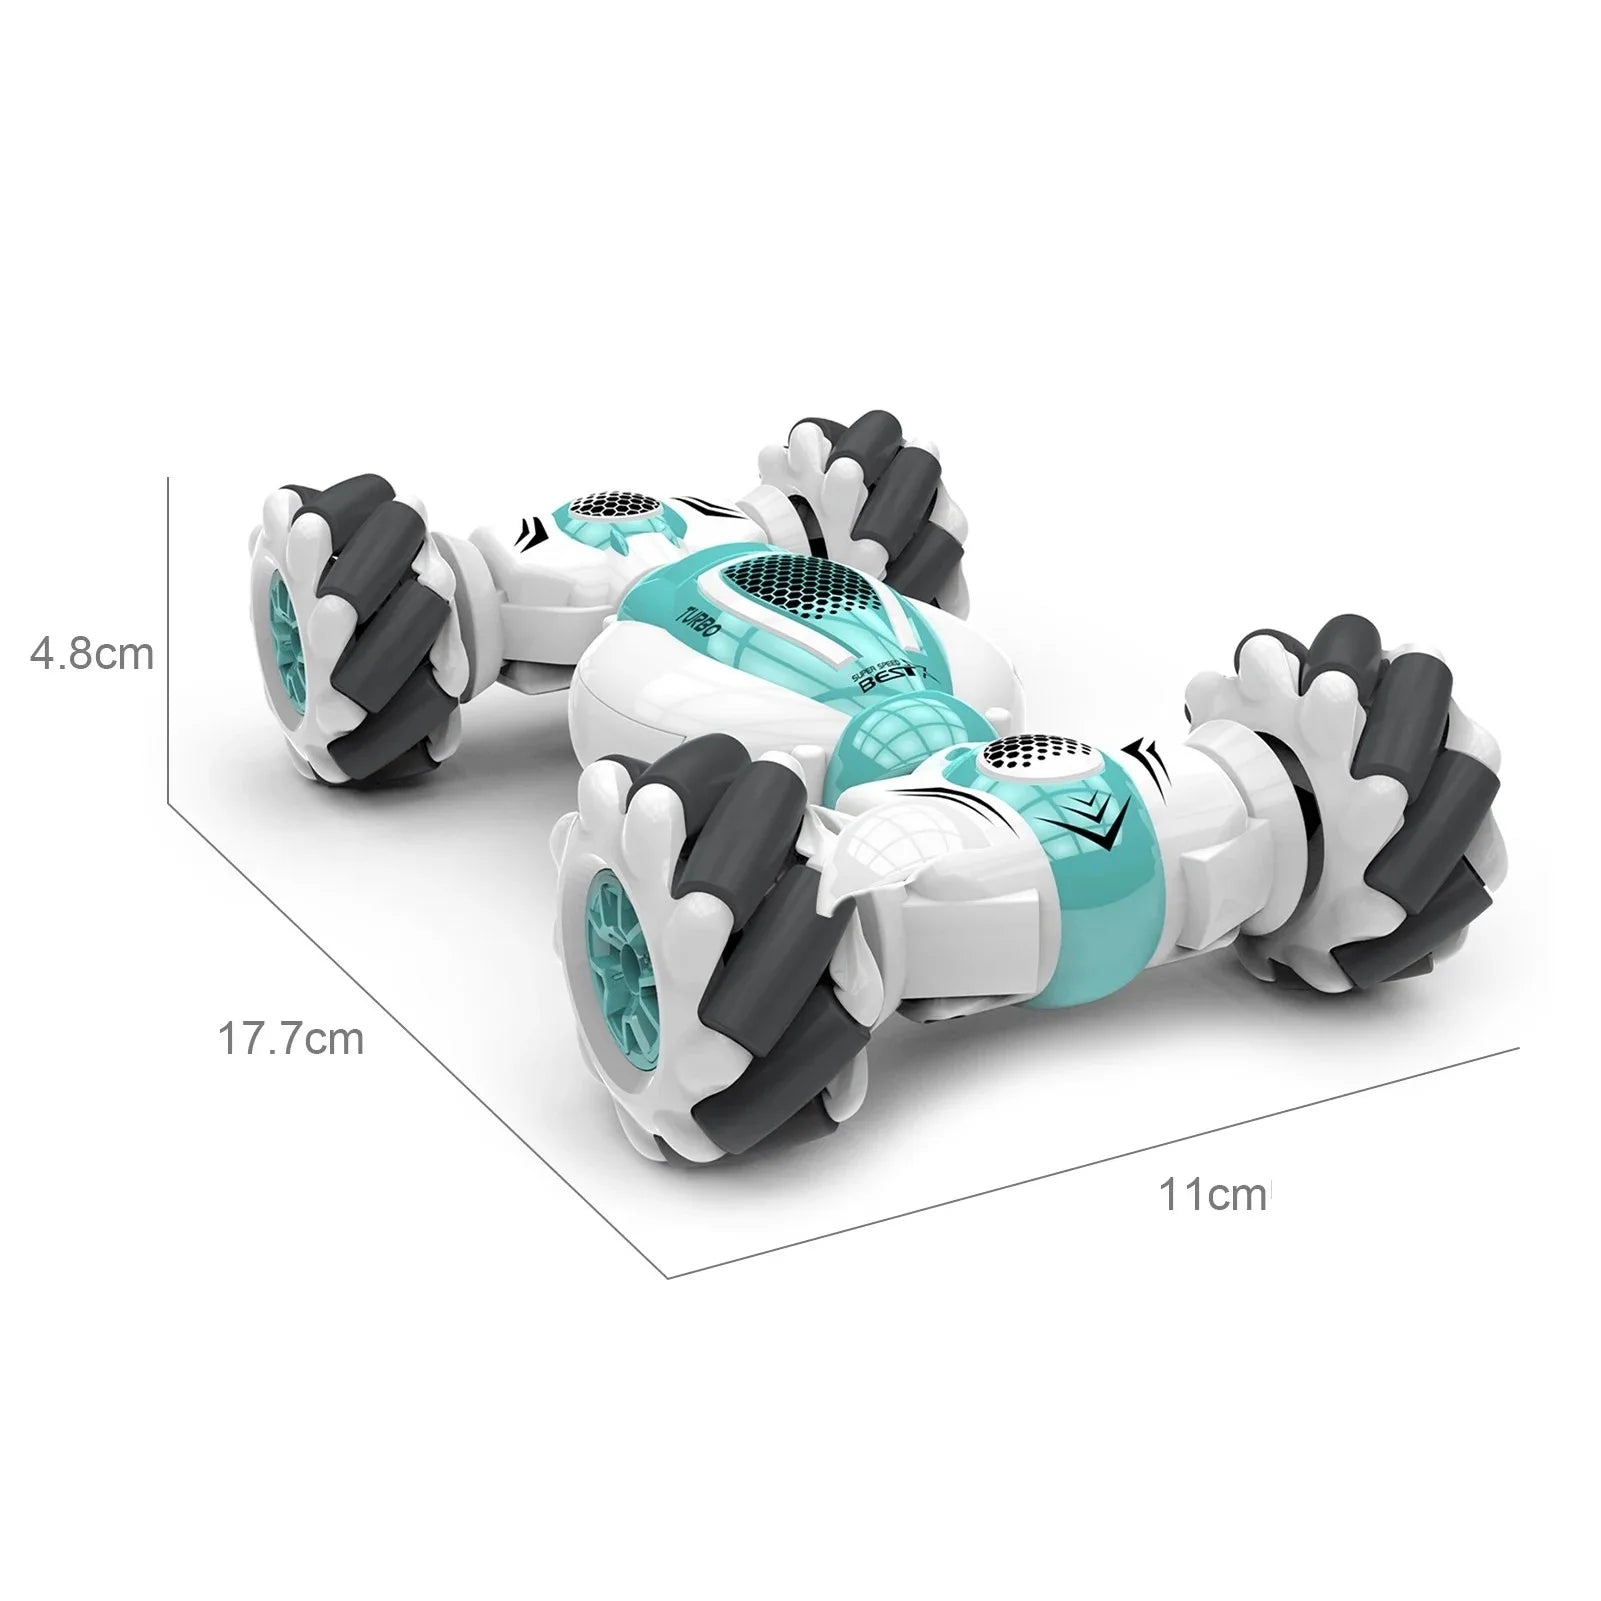 S-012 RC Stunt Car, you can choose to use the remote controller or the watch according to your own needs